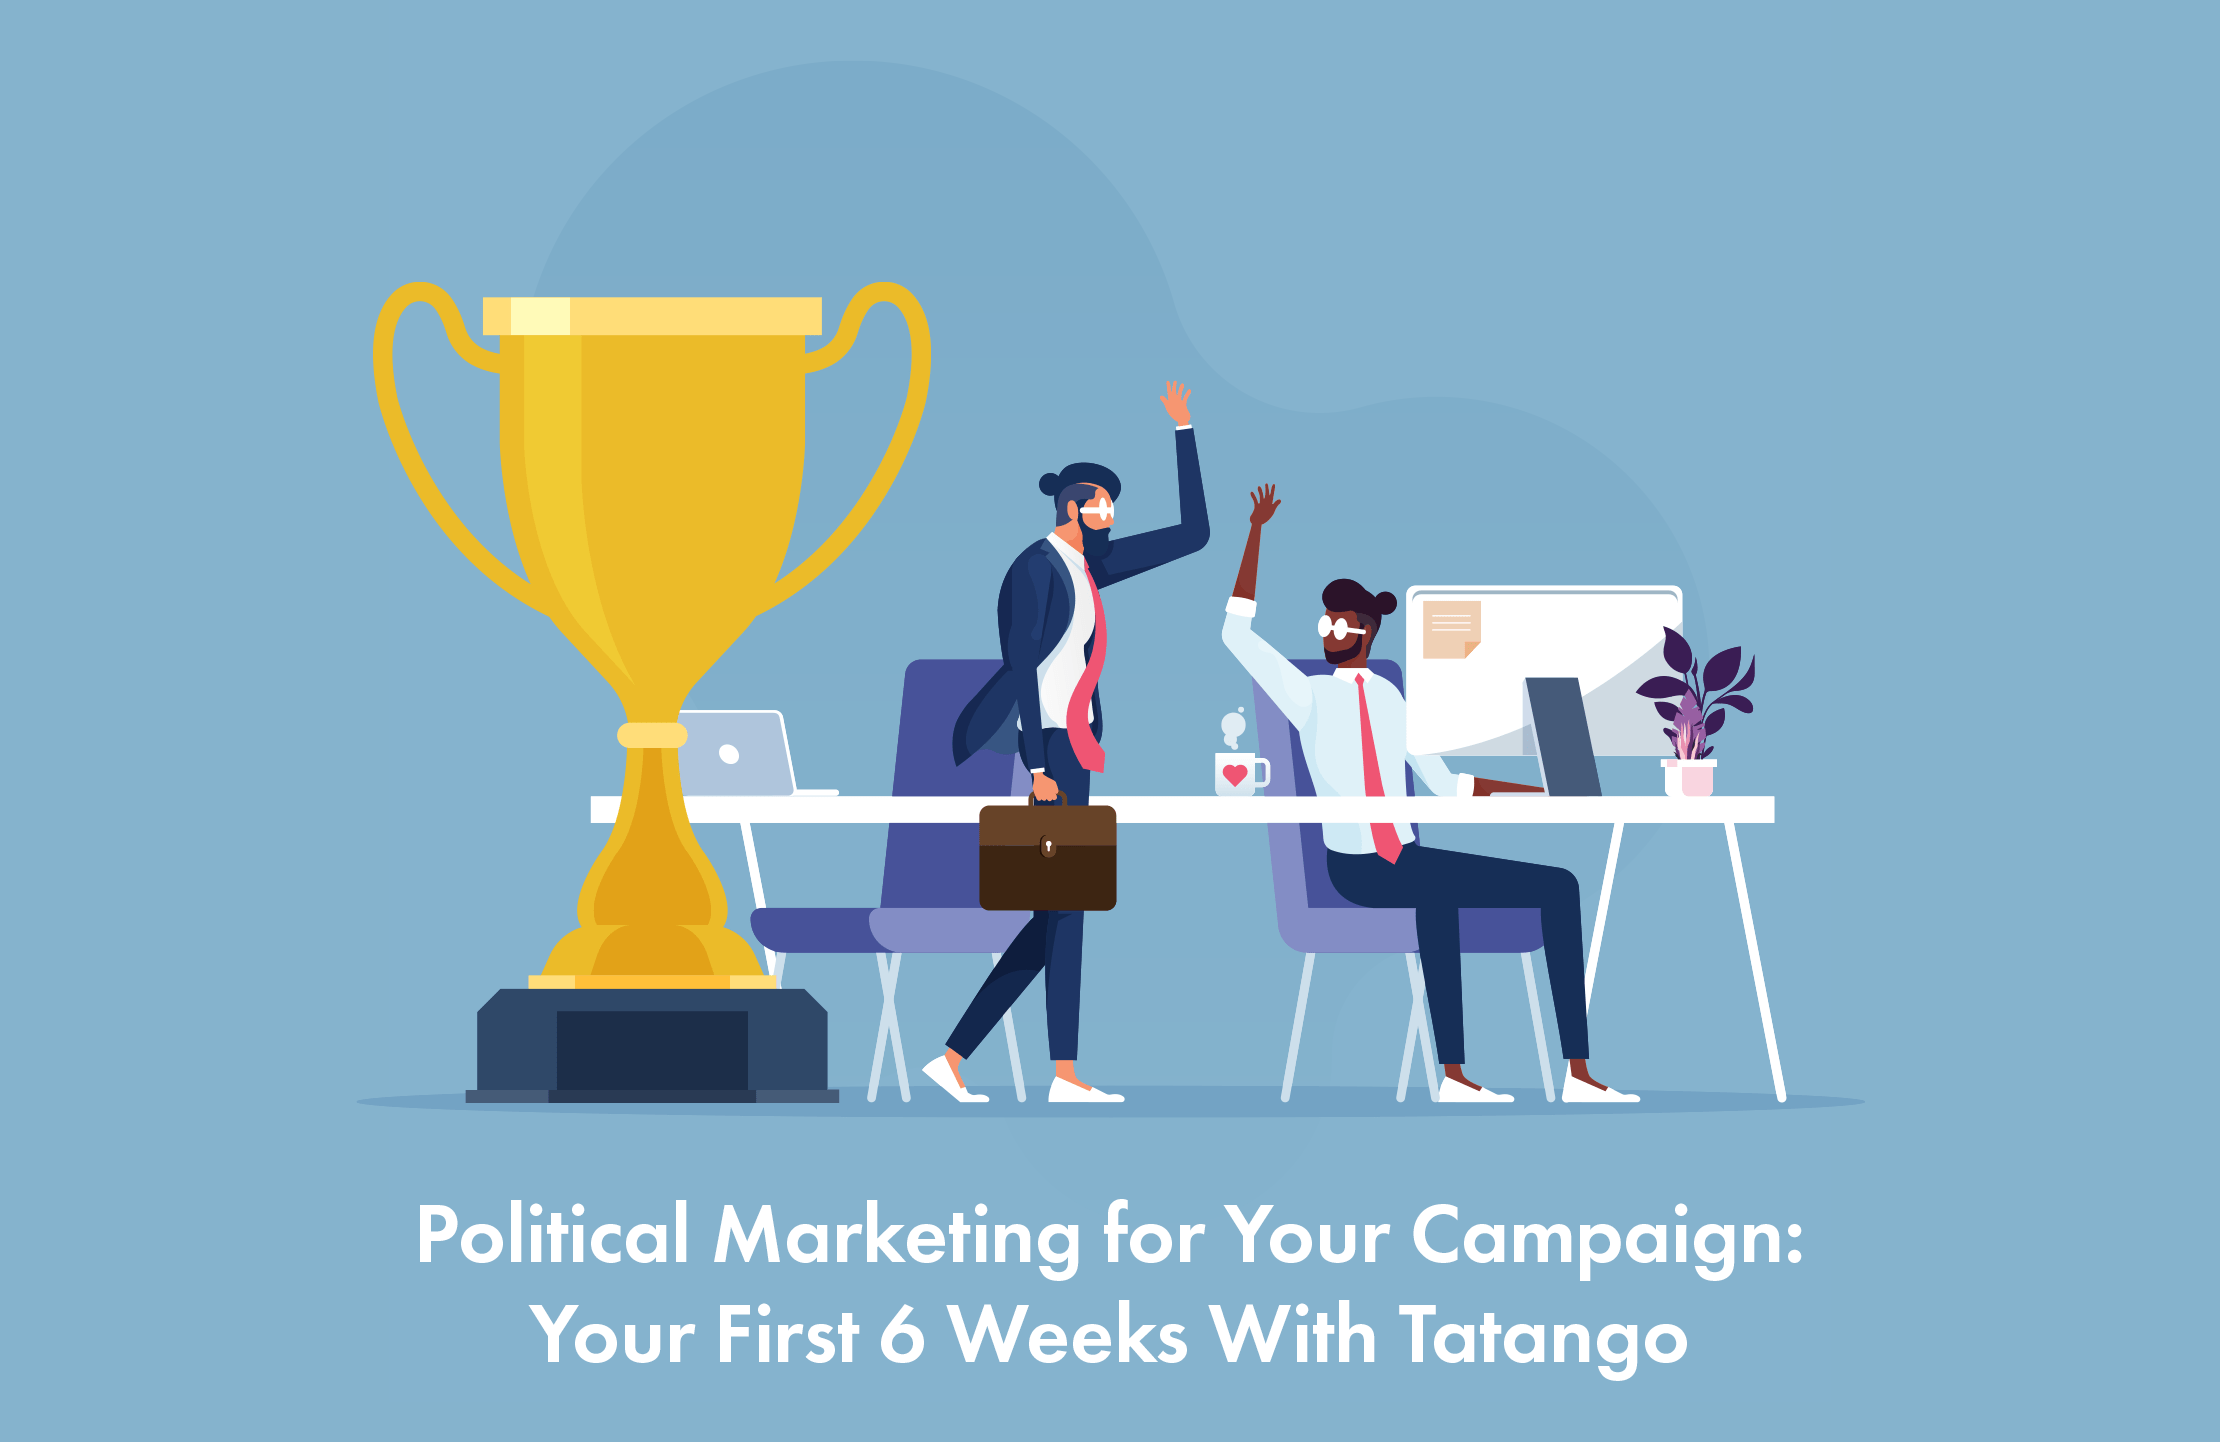 Political Marketing for Your Campaign Your First 6 Weeks With Tatango